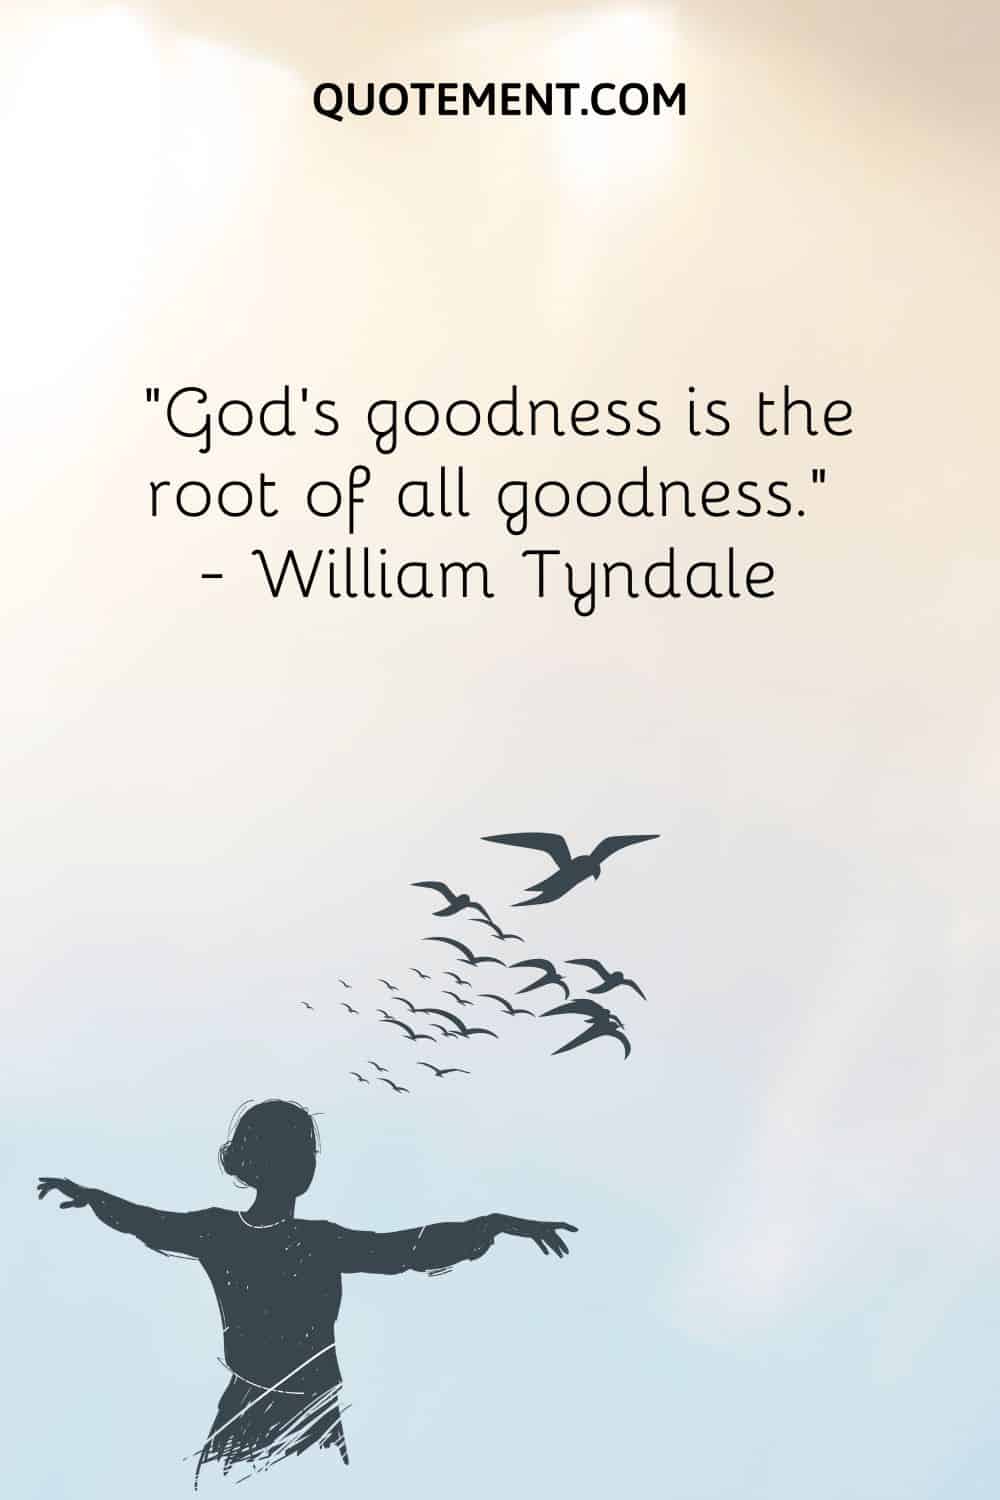 “God’s goodness is the root of all goodness.” ― William Tyndale